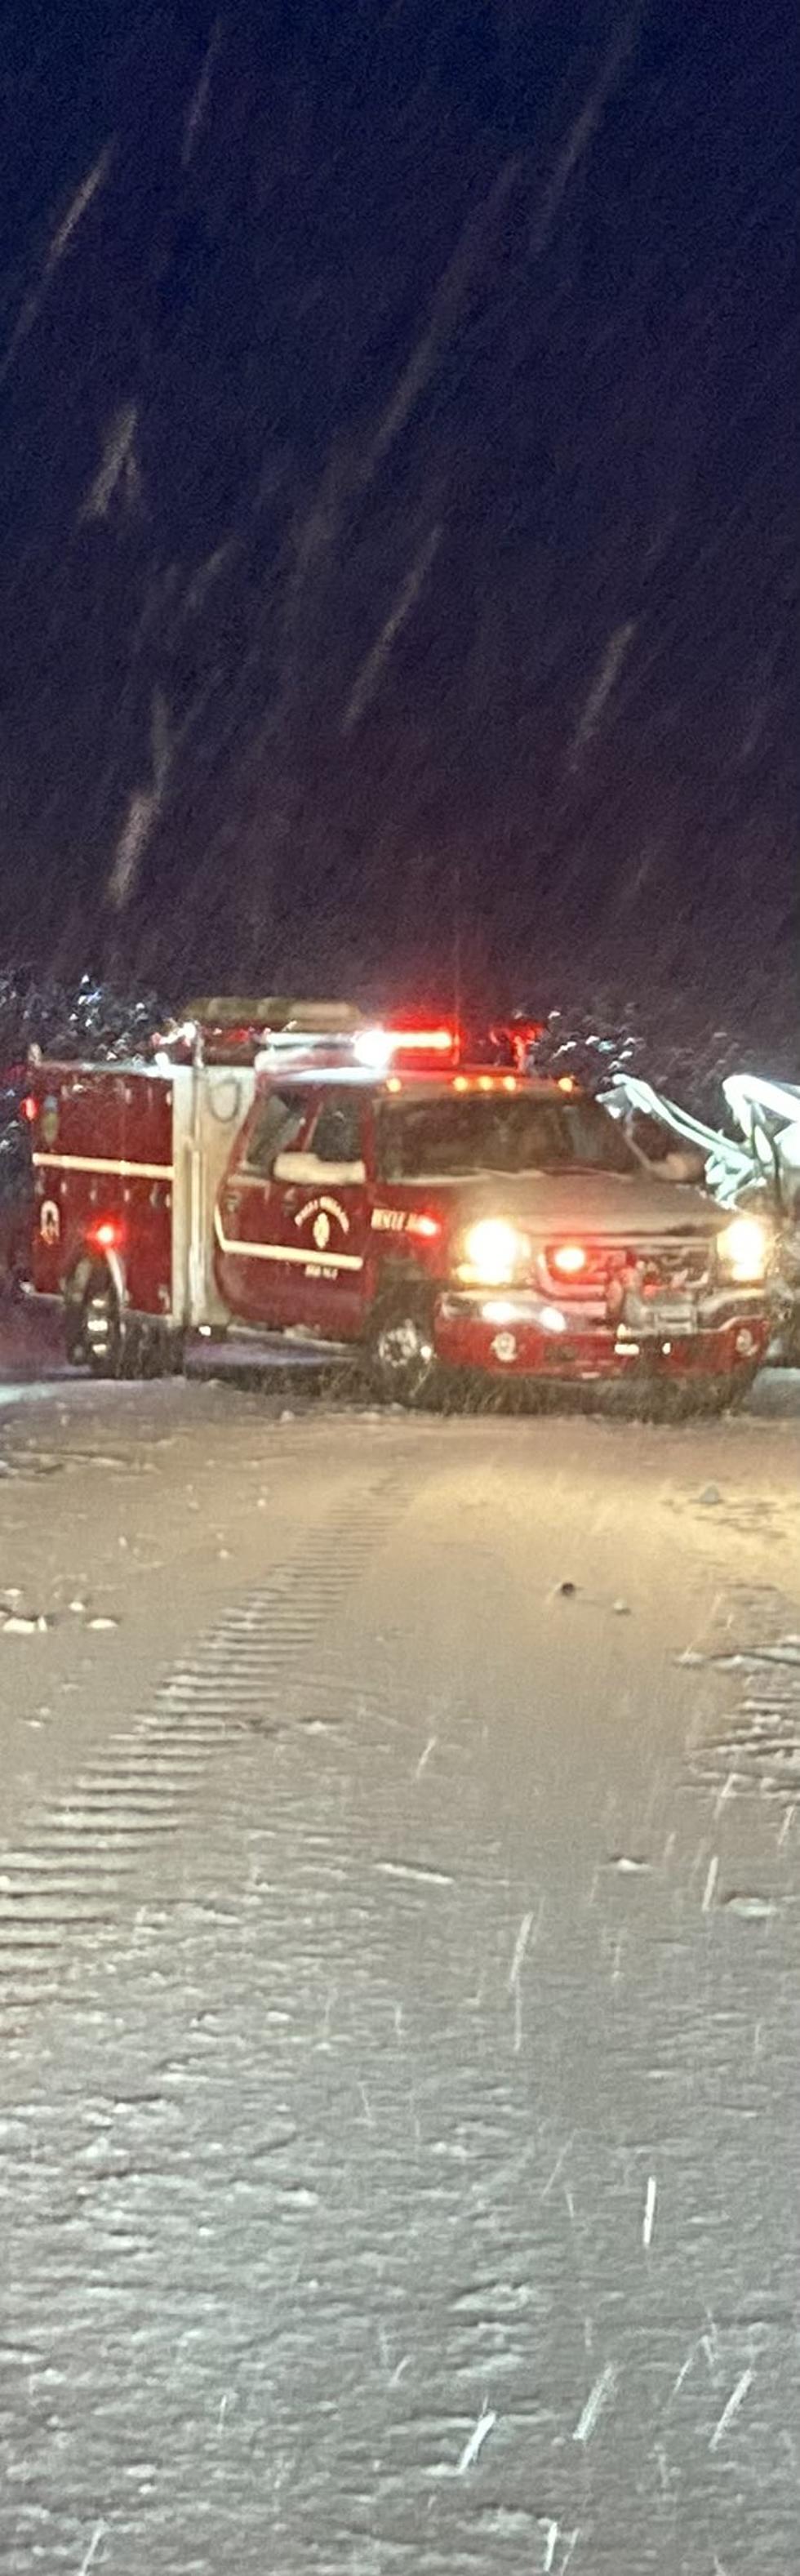 WSP is Reporting that Snowy Conditions Caused a Fatal Crash on US 12